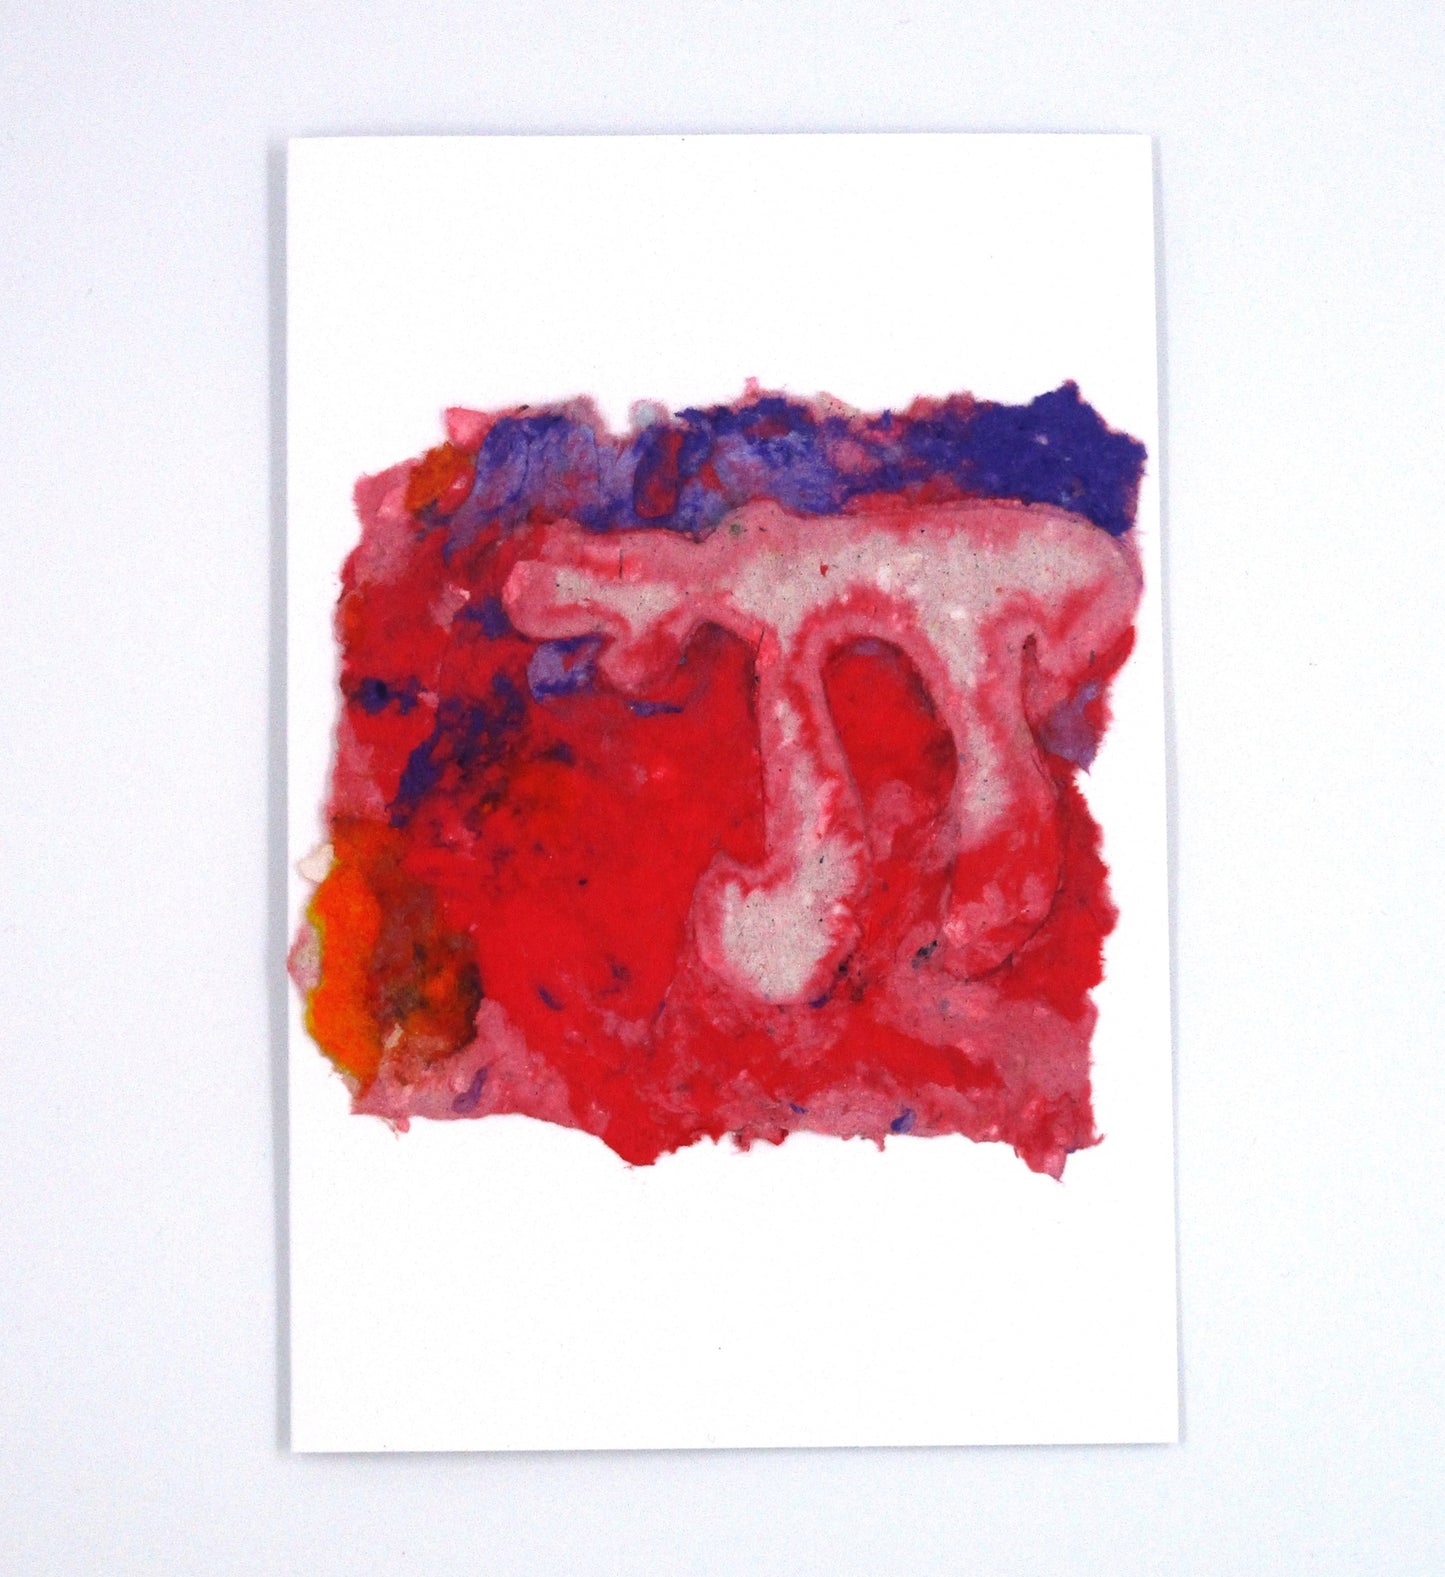 Handmade paper greeting card with white Chai against purple and red background